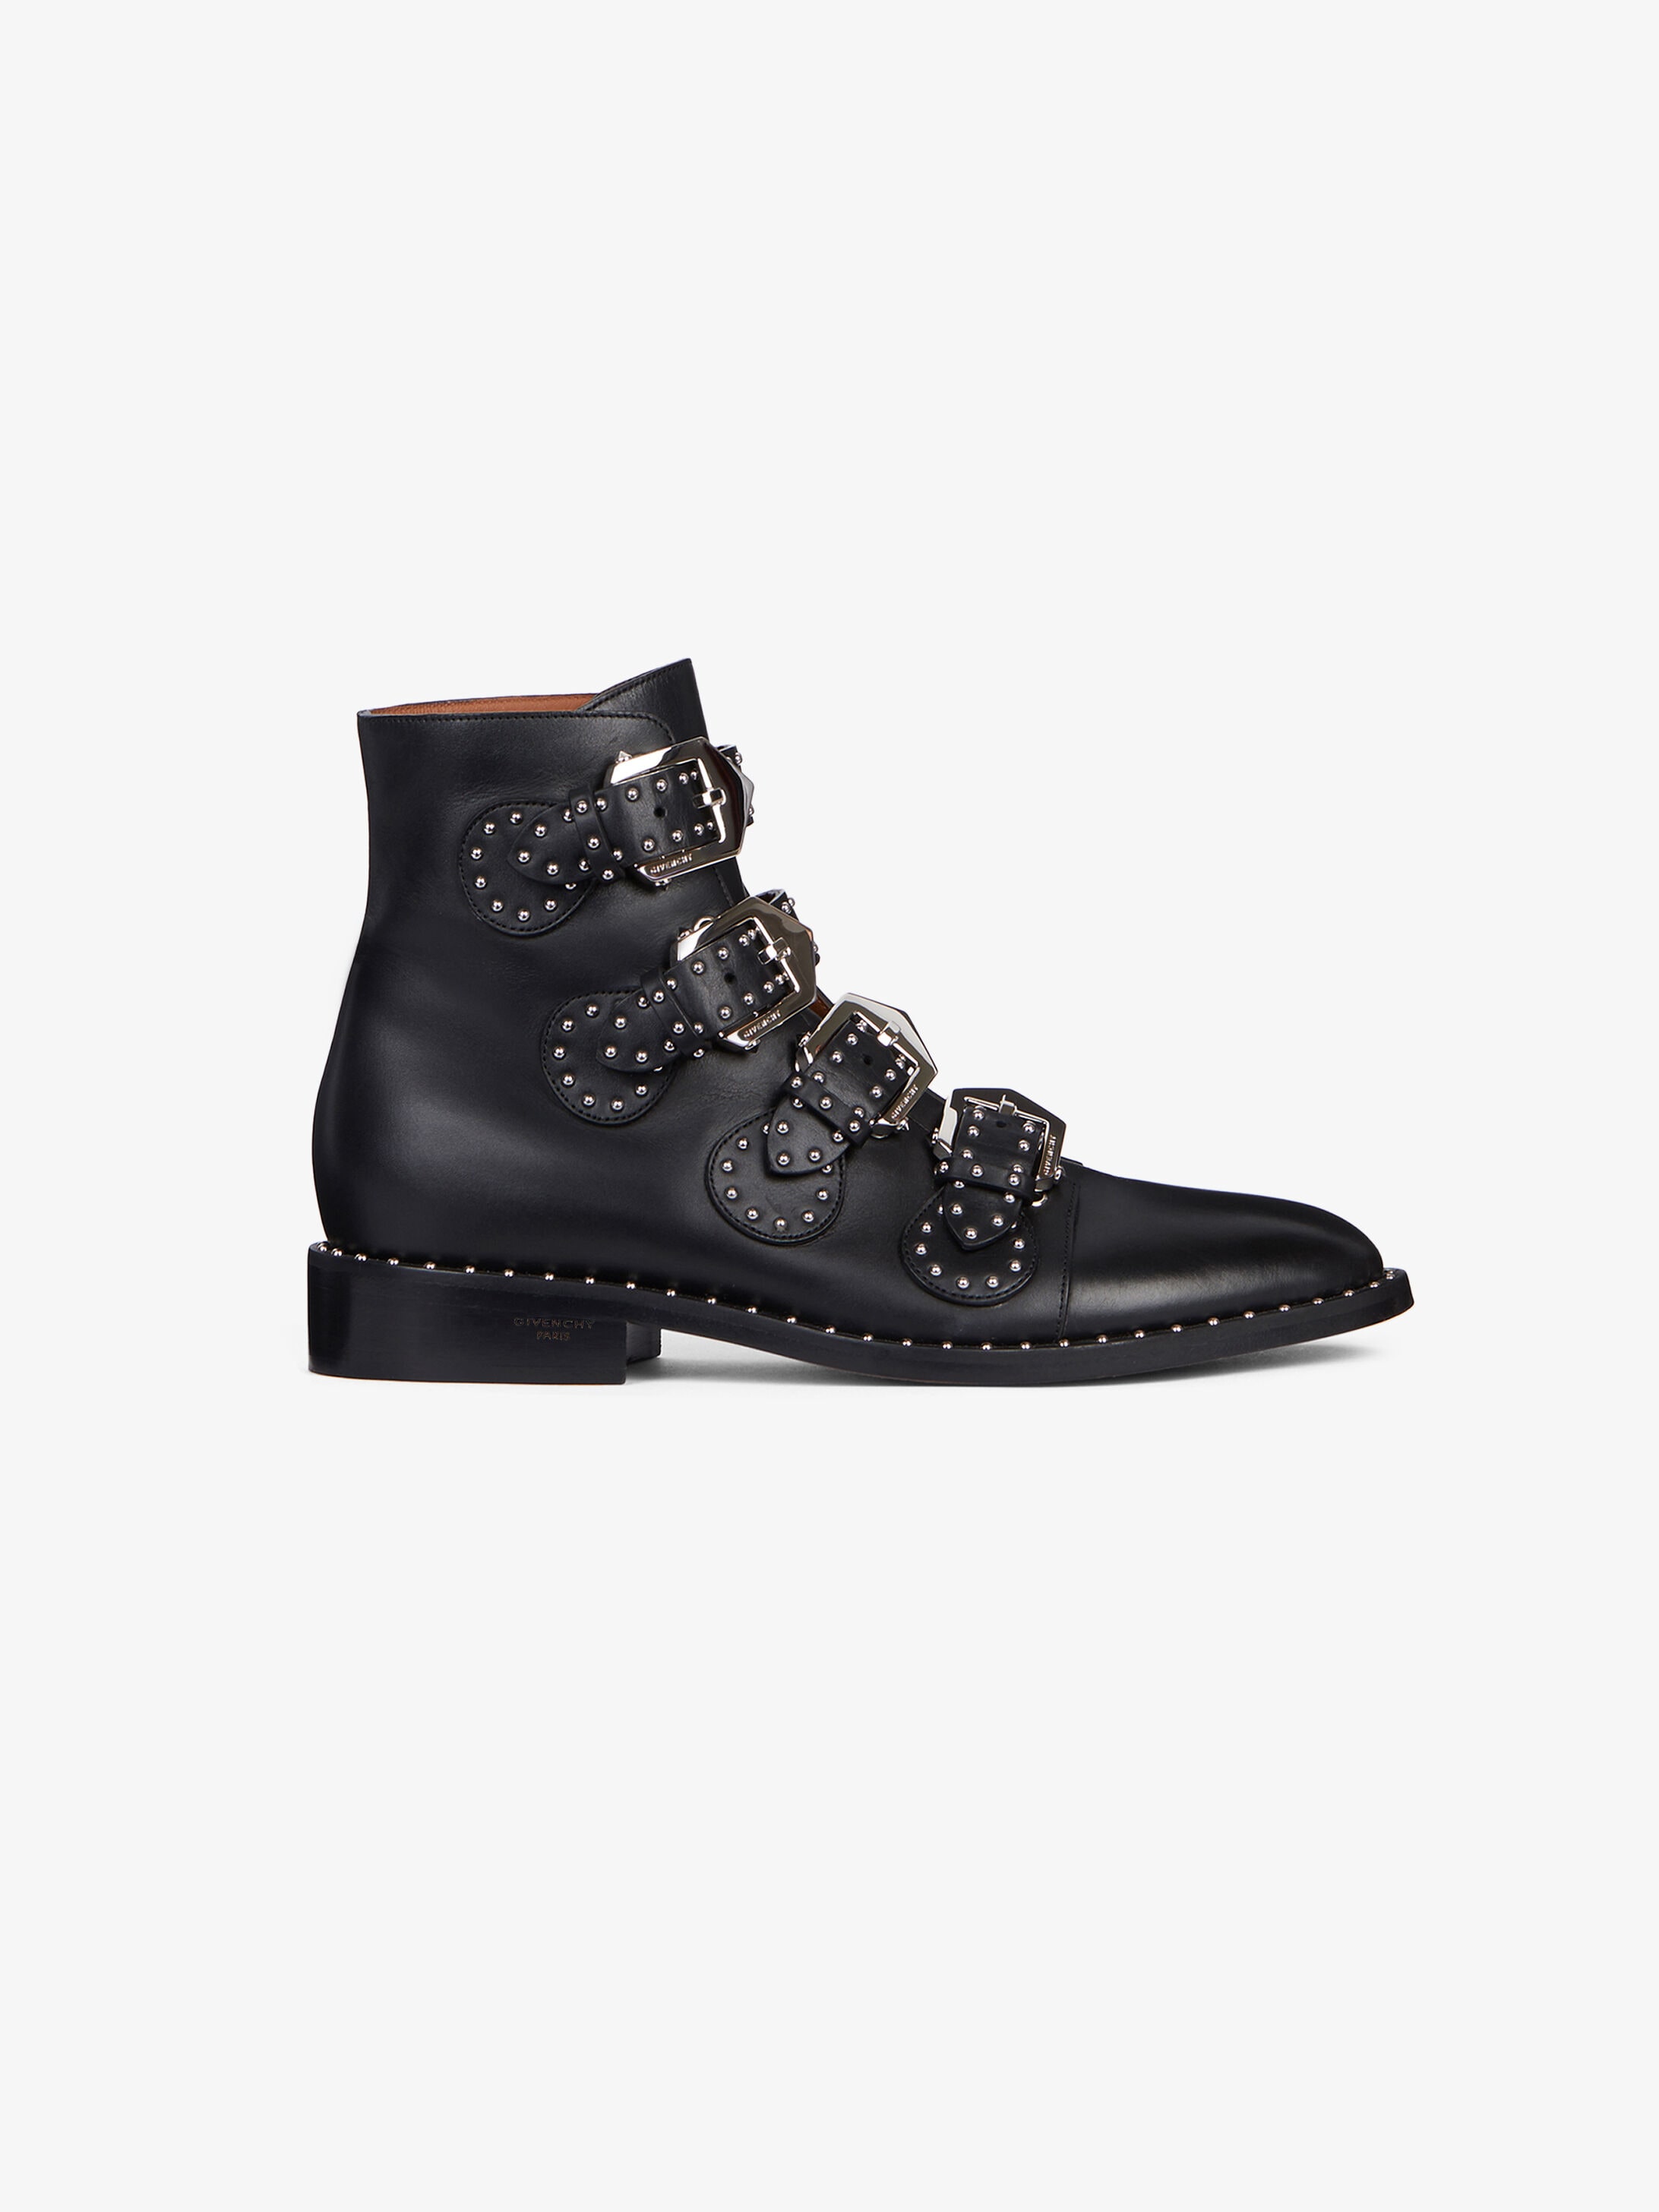 boots givenchy